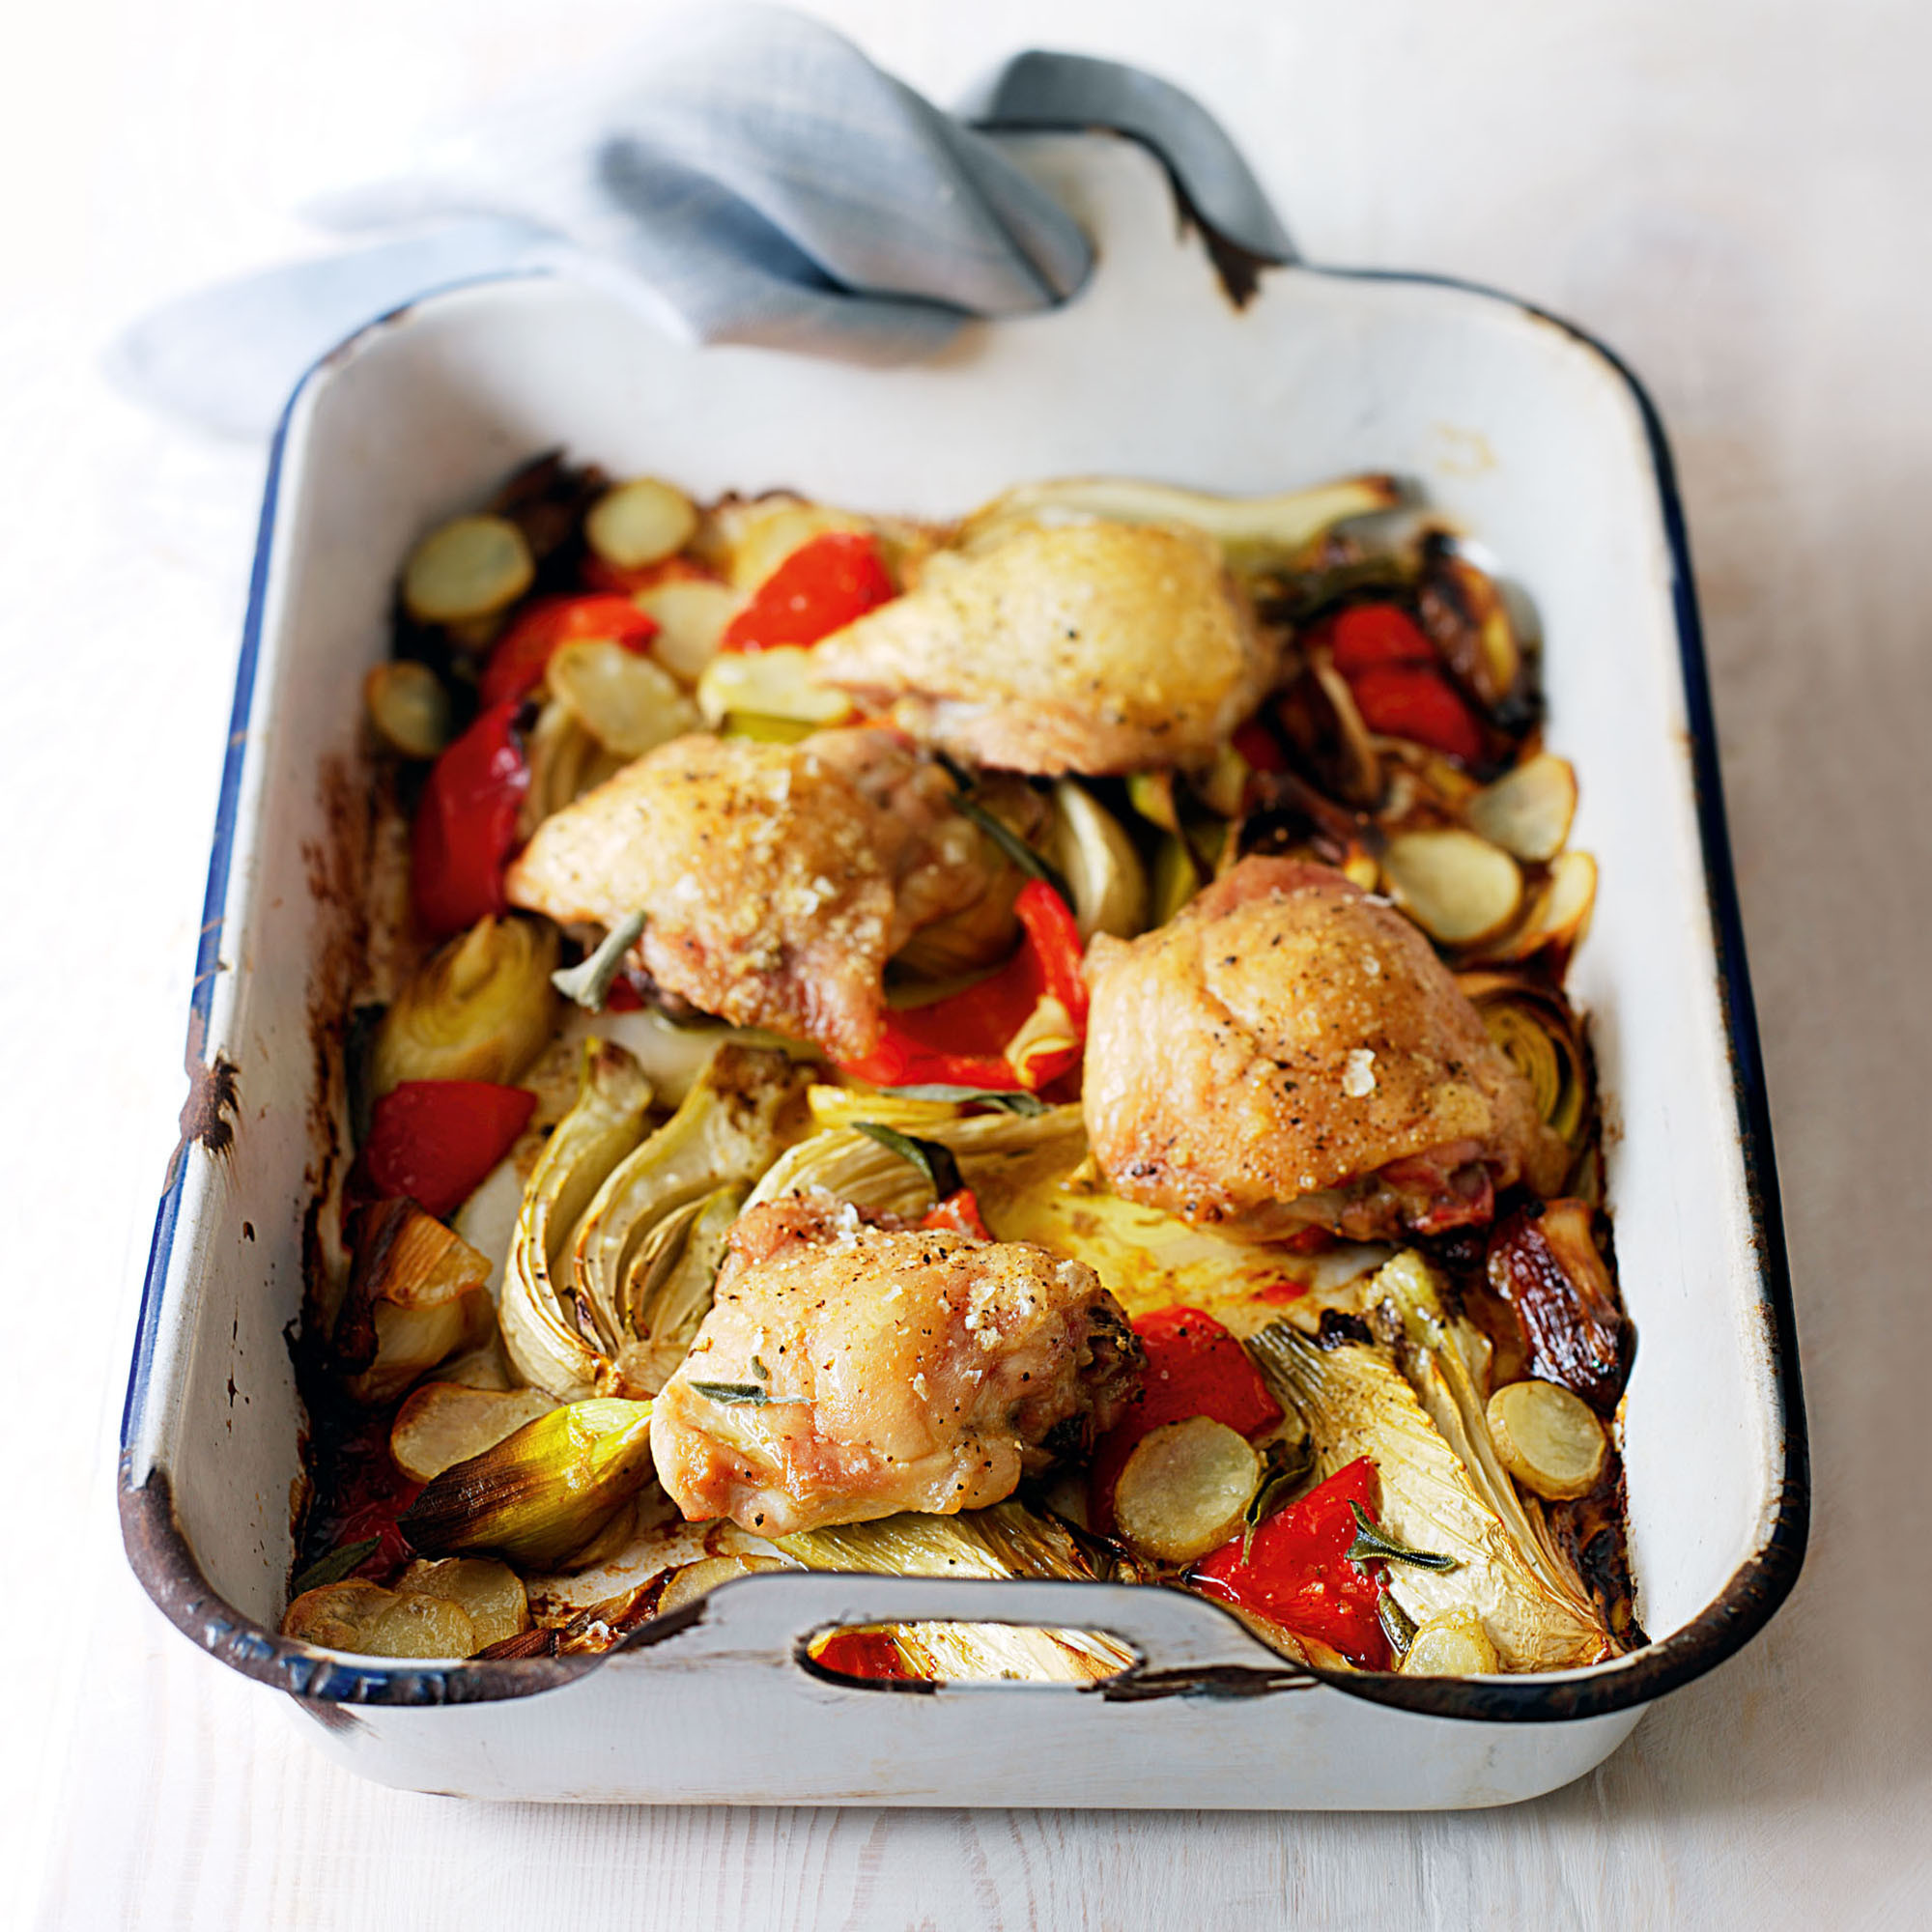 Oven Roasted Chicken Pieces And Vegetables
 Chicken Thighs with Roasted Ve ables Woman And Home